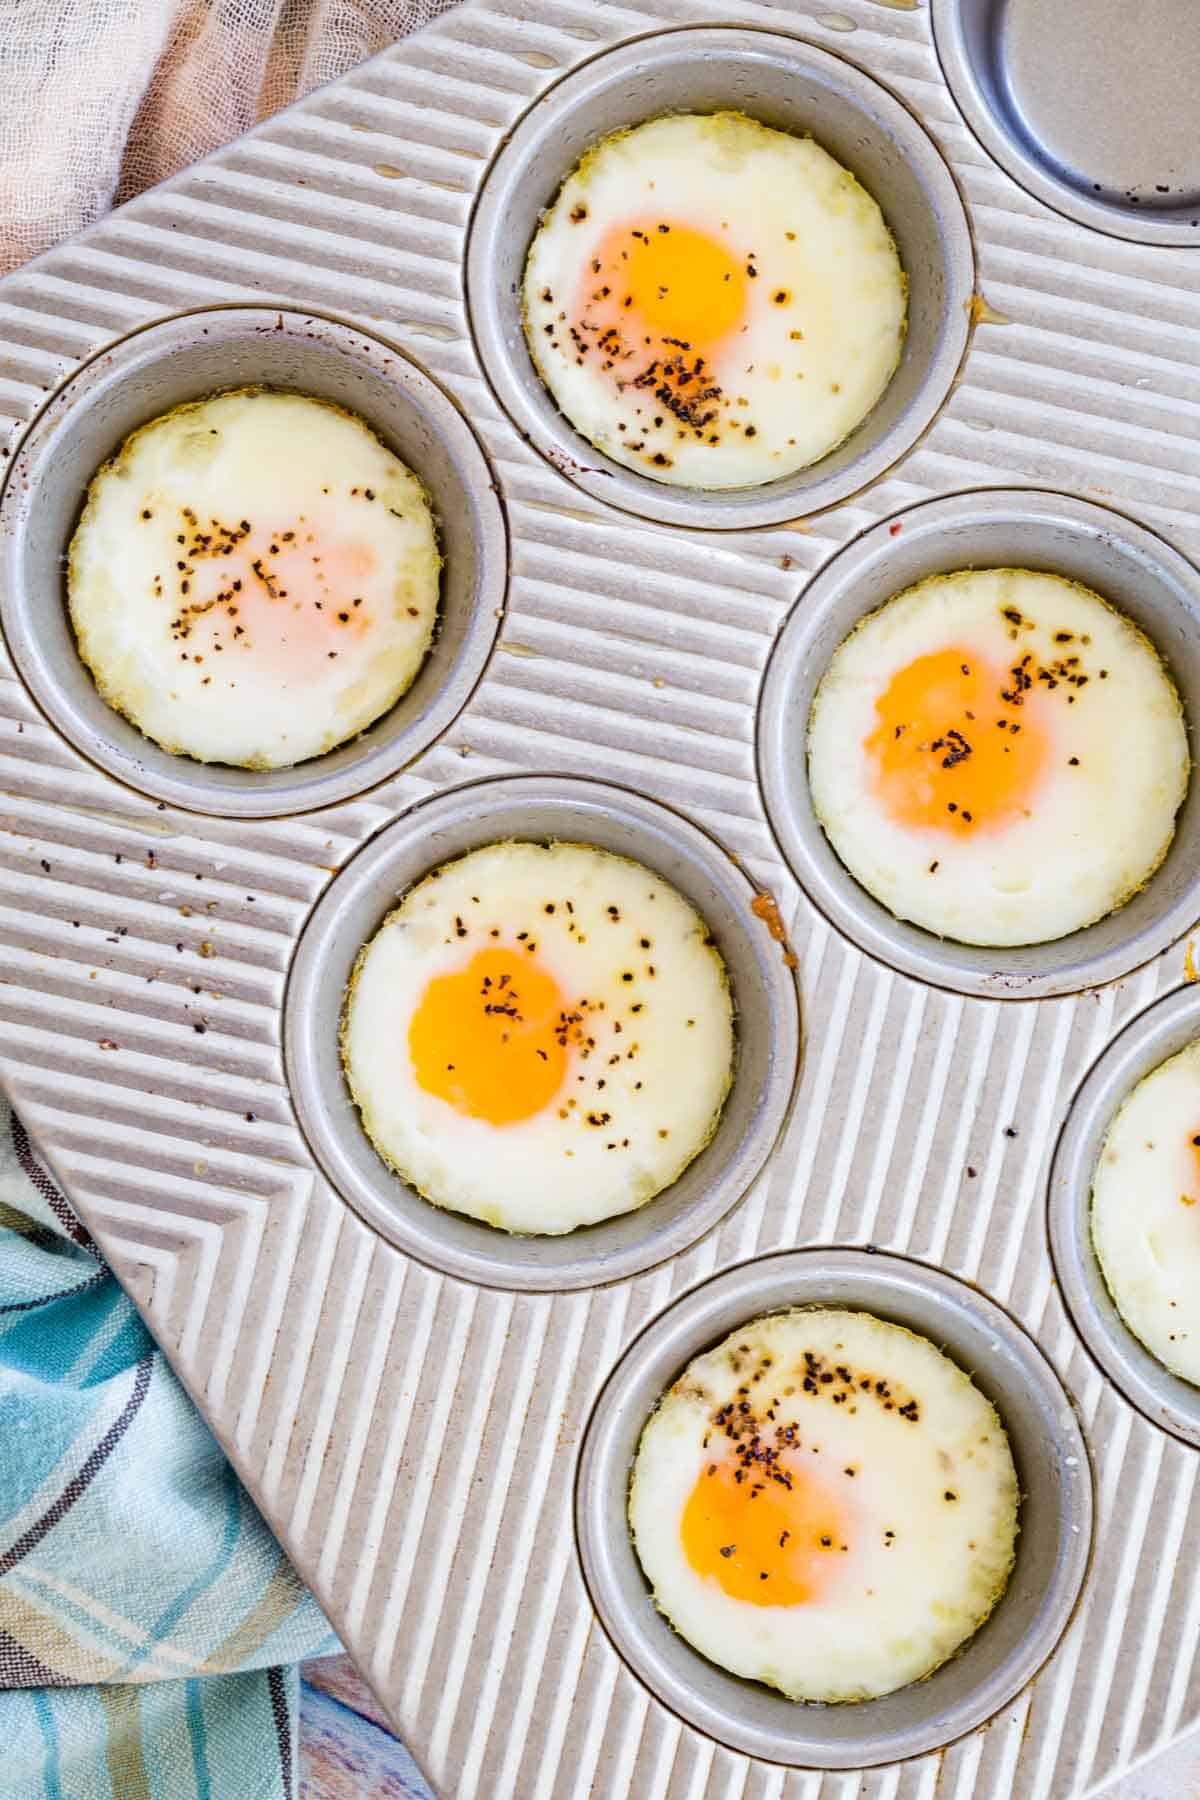 Top view of seasoned baked eggs in the wells of a metal muffin pan.